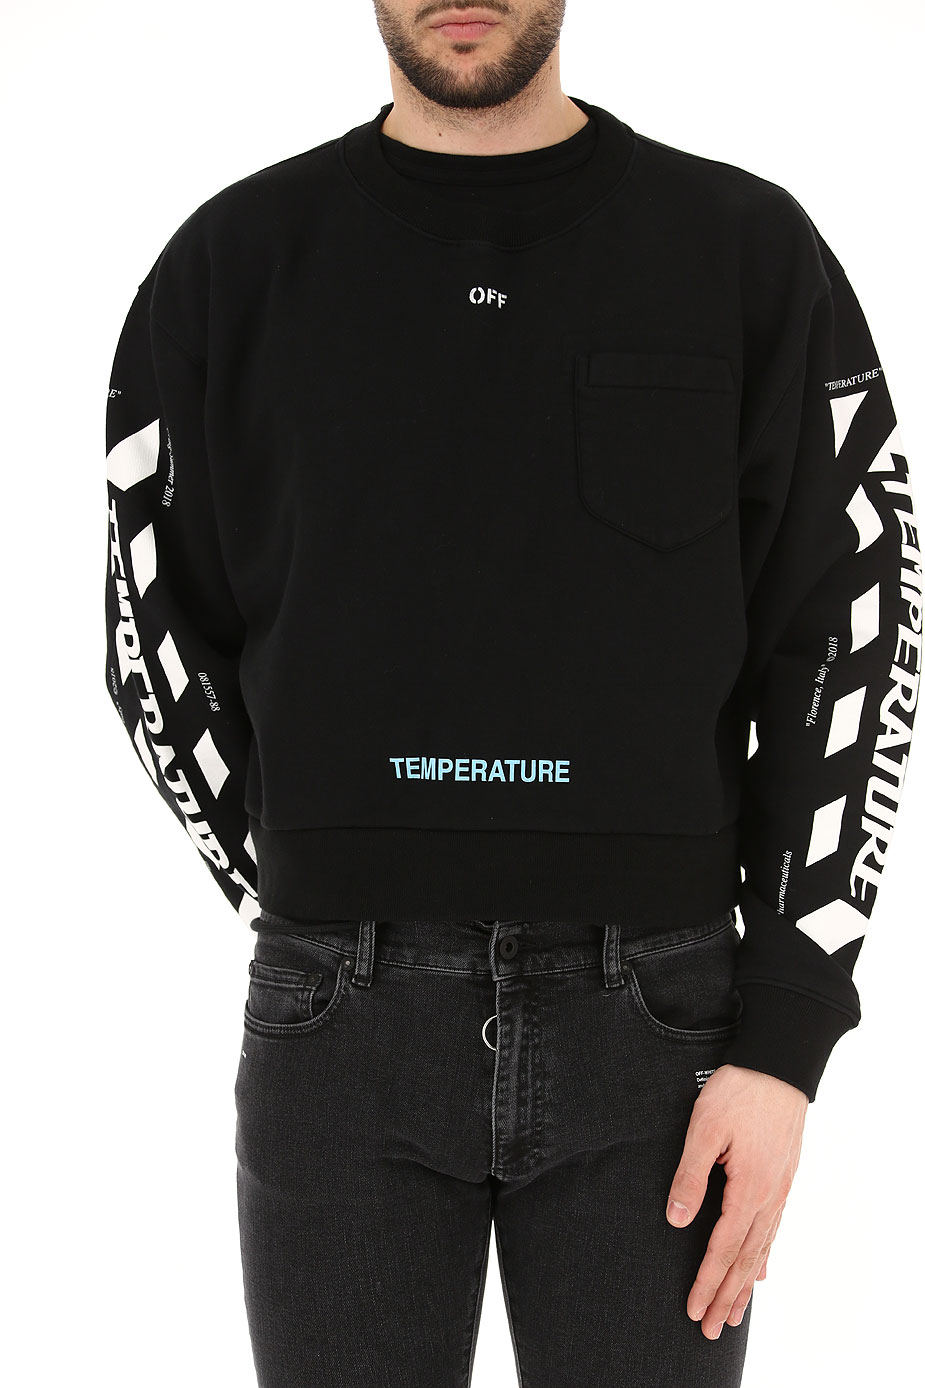 Mens Clothing Off-White Virgil Abloh, Style code: 0mba022s18-1920231001-